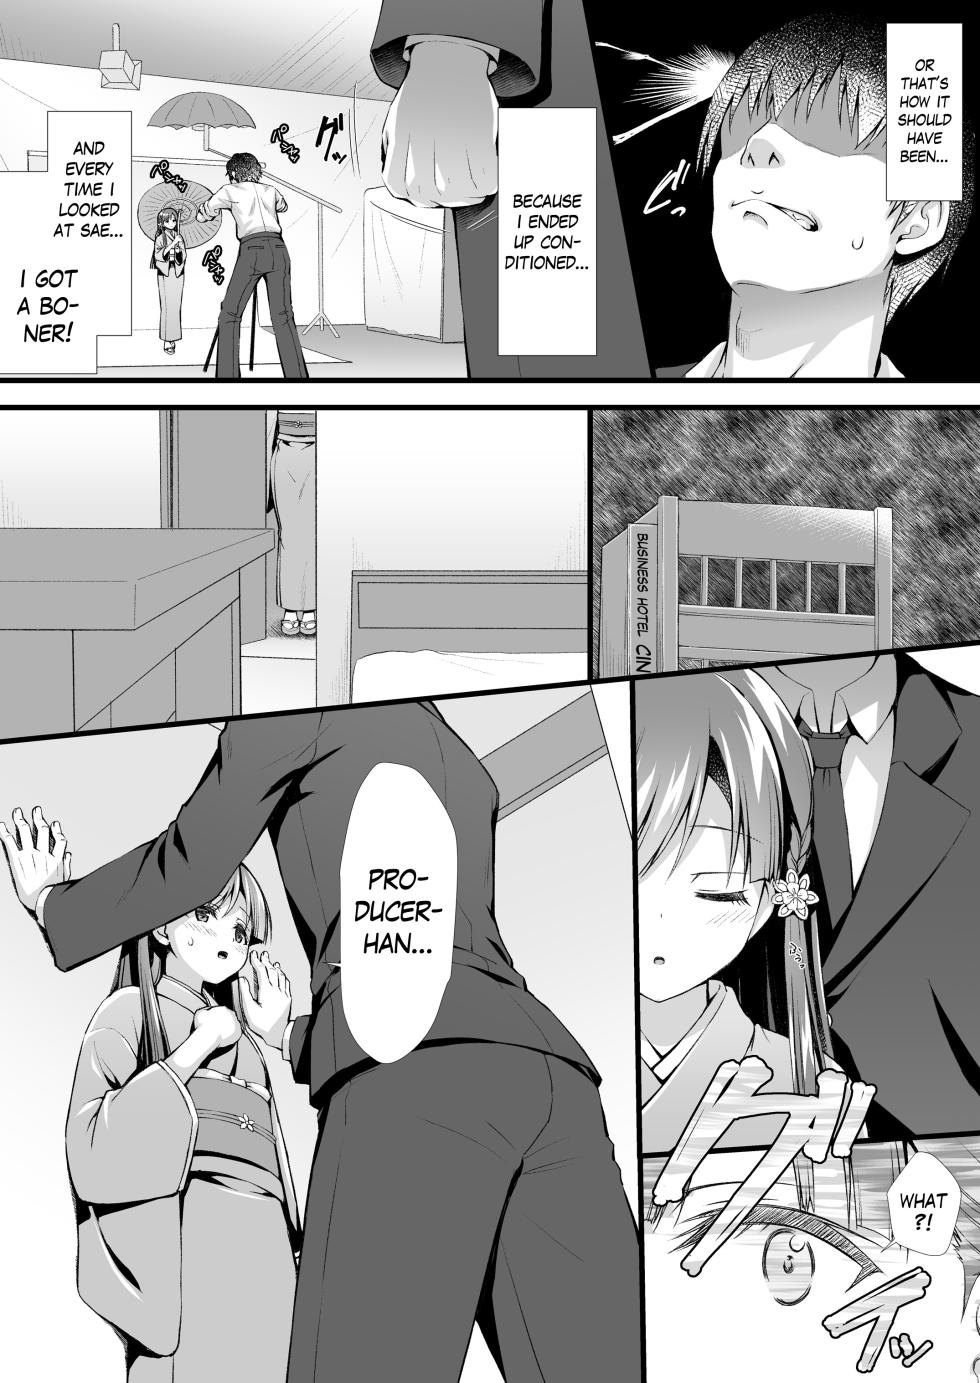 A book about being squeezed by Sae-han - Page 10